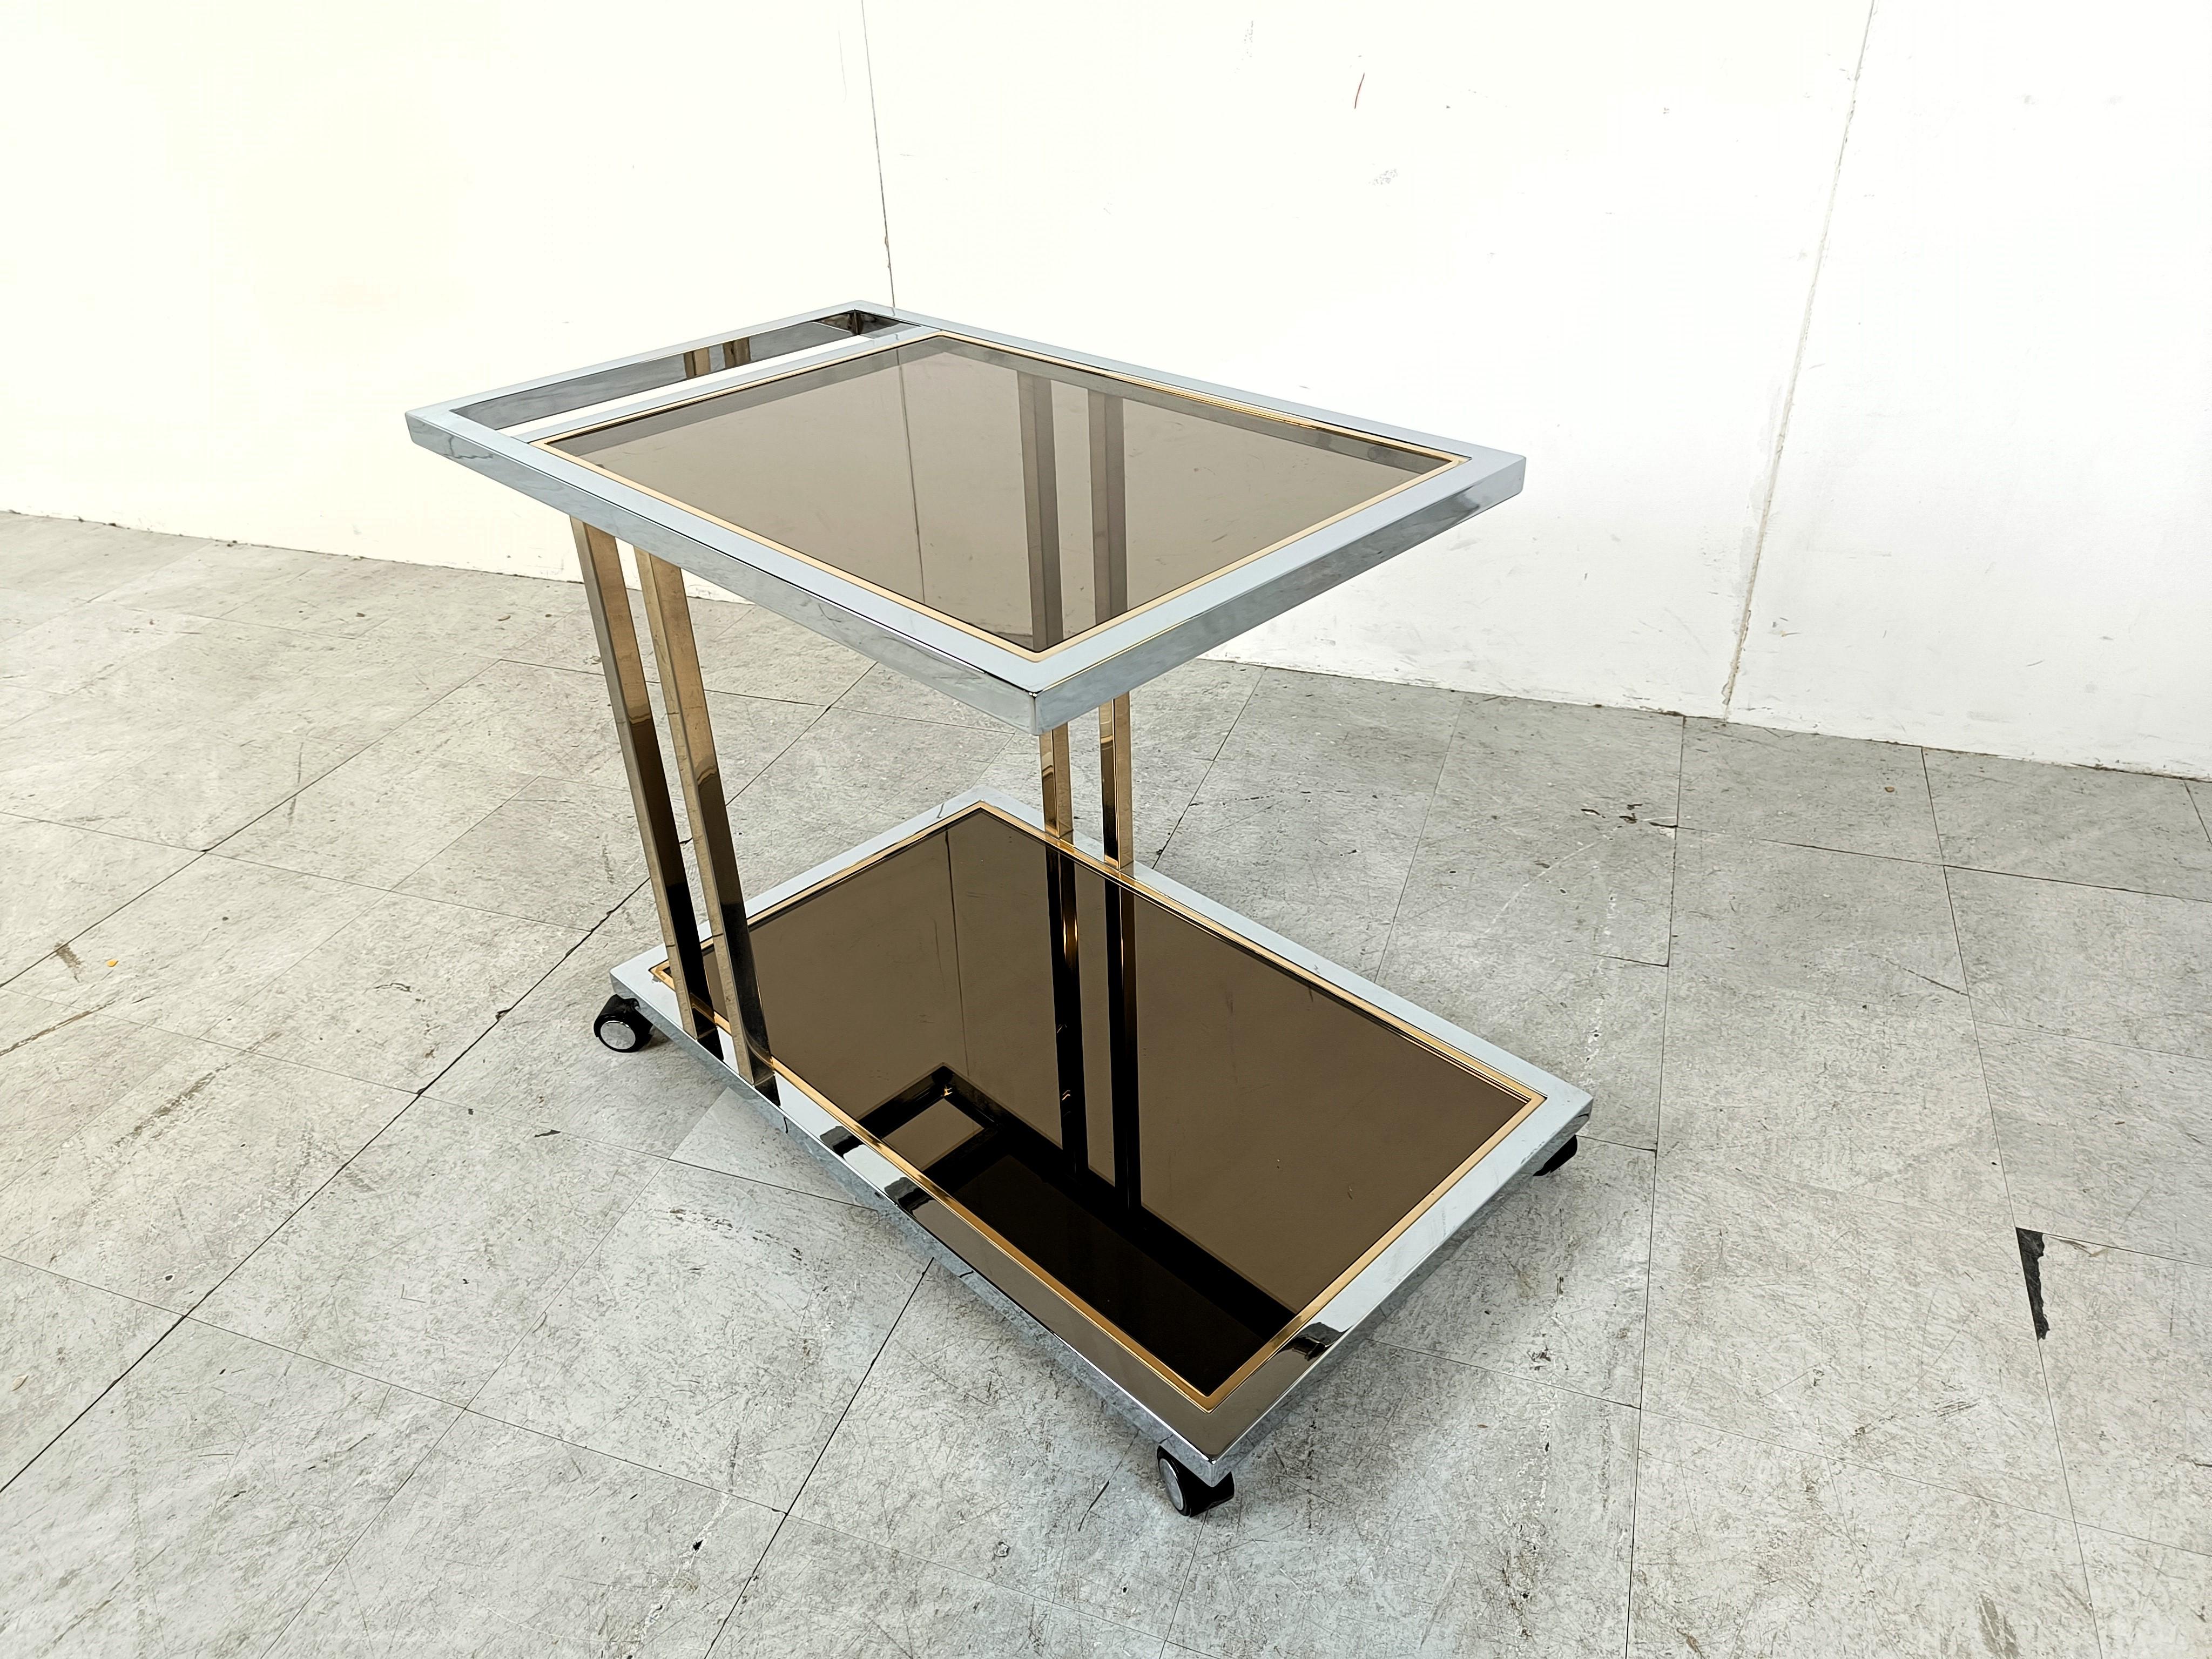 This two tier cart consists of a smoked glass top and a mirrored glass lower shelve and is made of brass and chrome.

Polished brass and chrome.

Good condition, original label still attached.

1970s - Belgium

Dimensions:

Height: